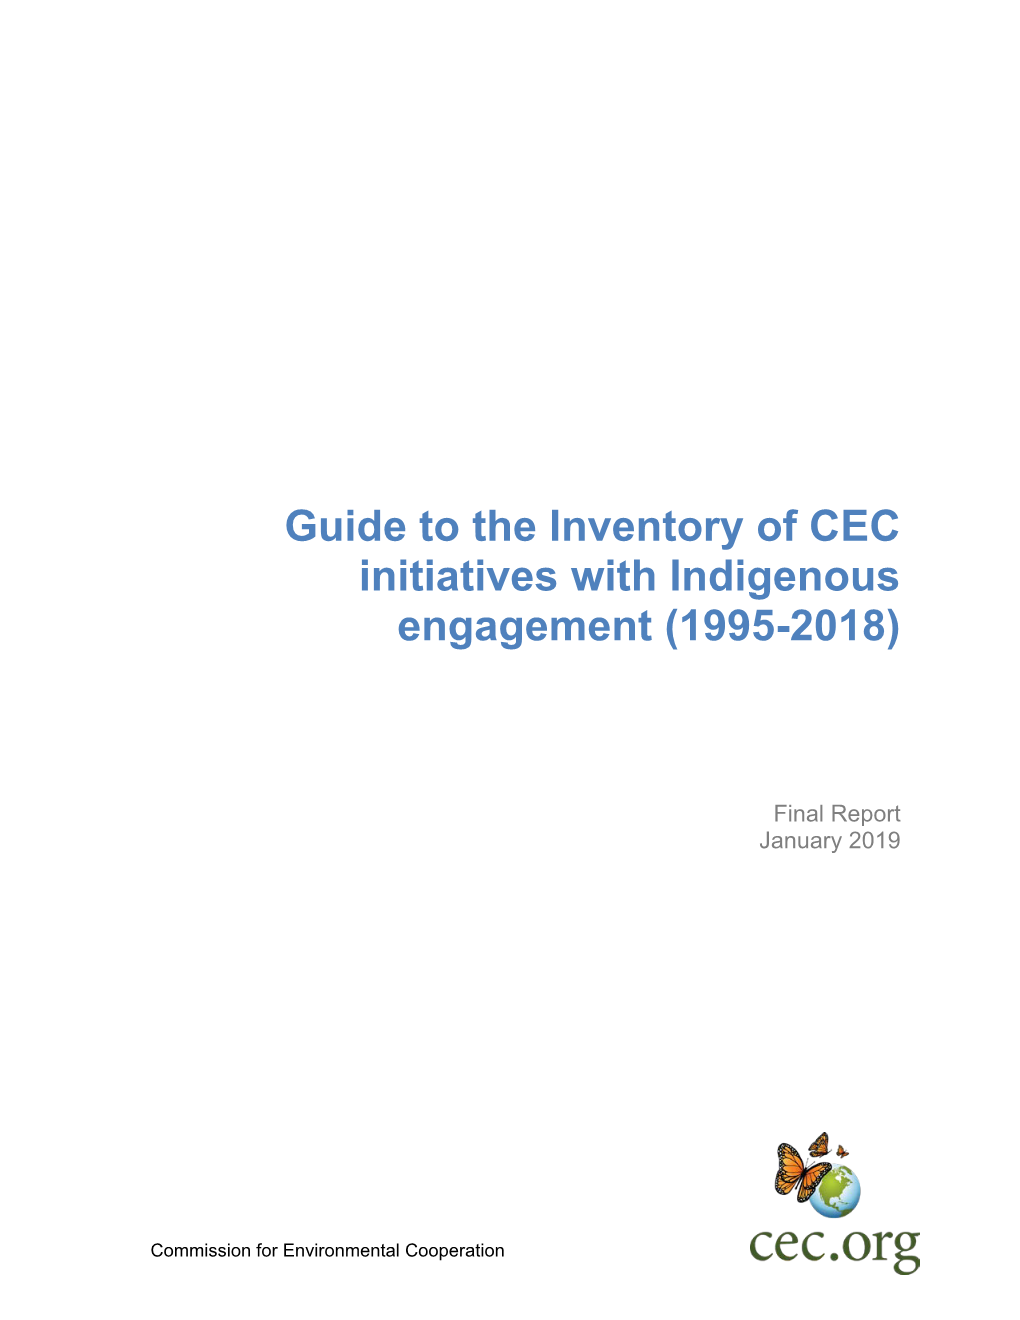 Guide to the Inventory of CEC Initiatives with Indigenous Engagement (1995-2018)